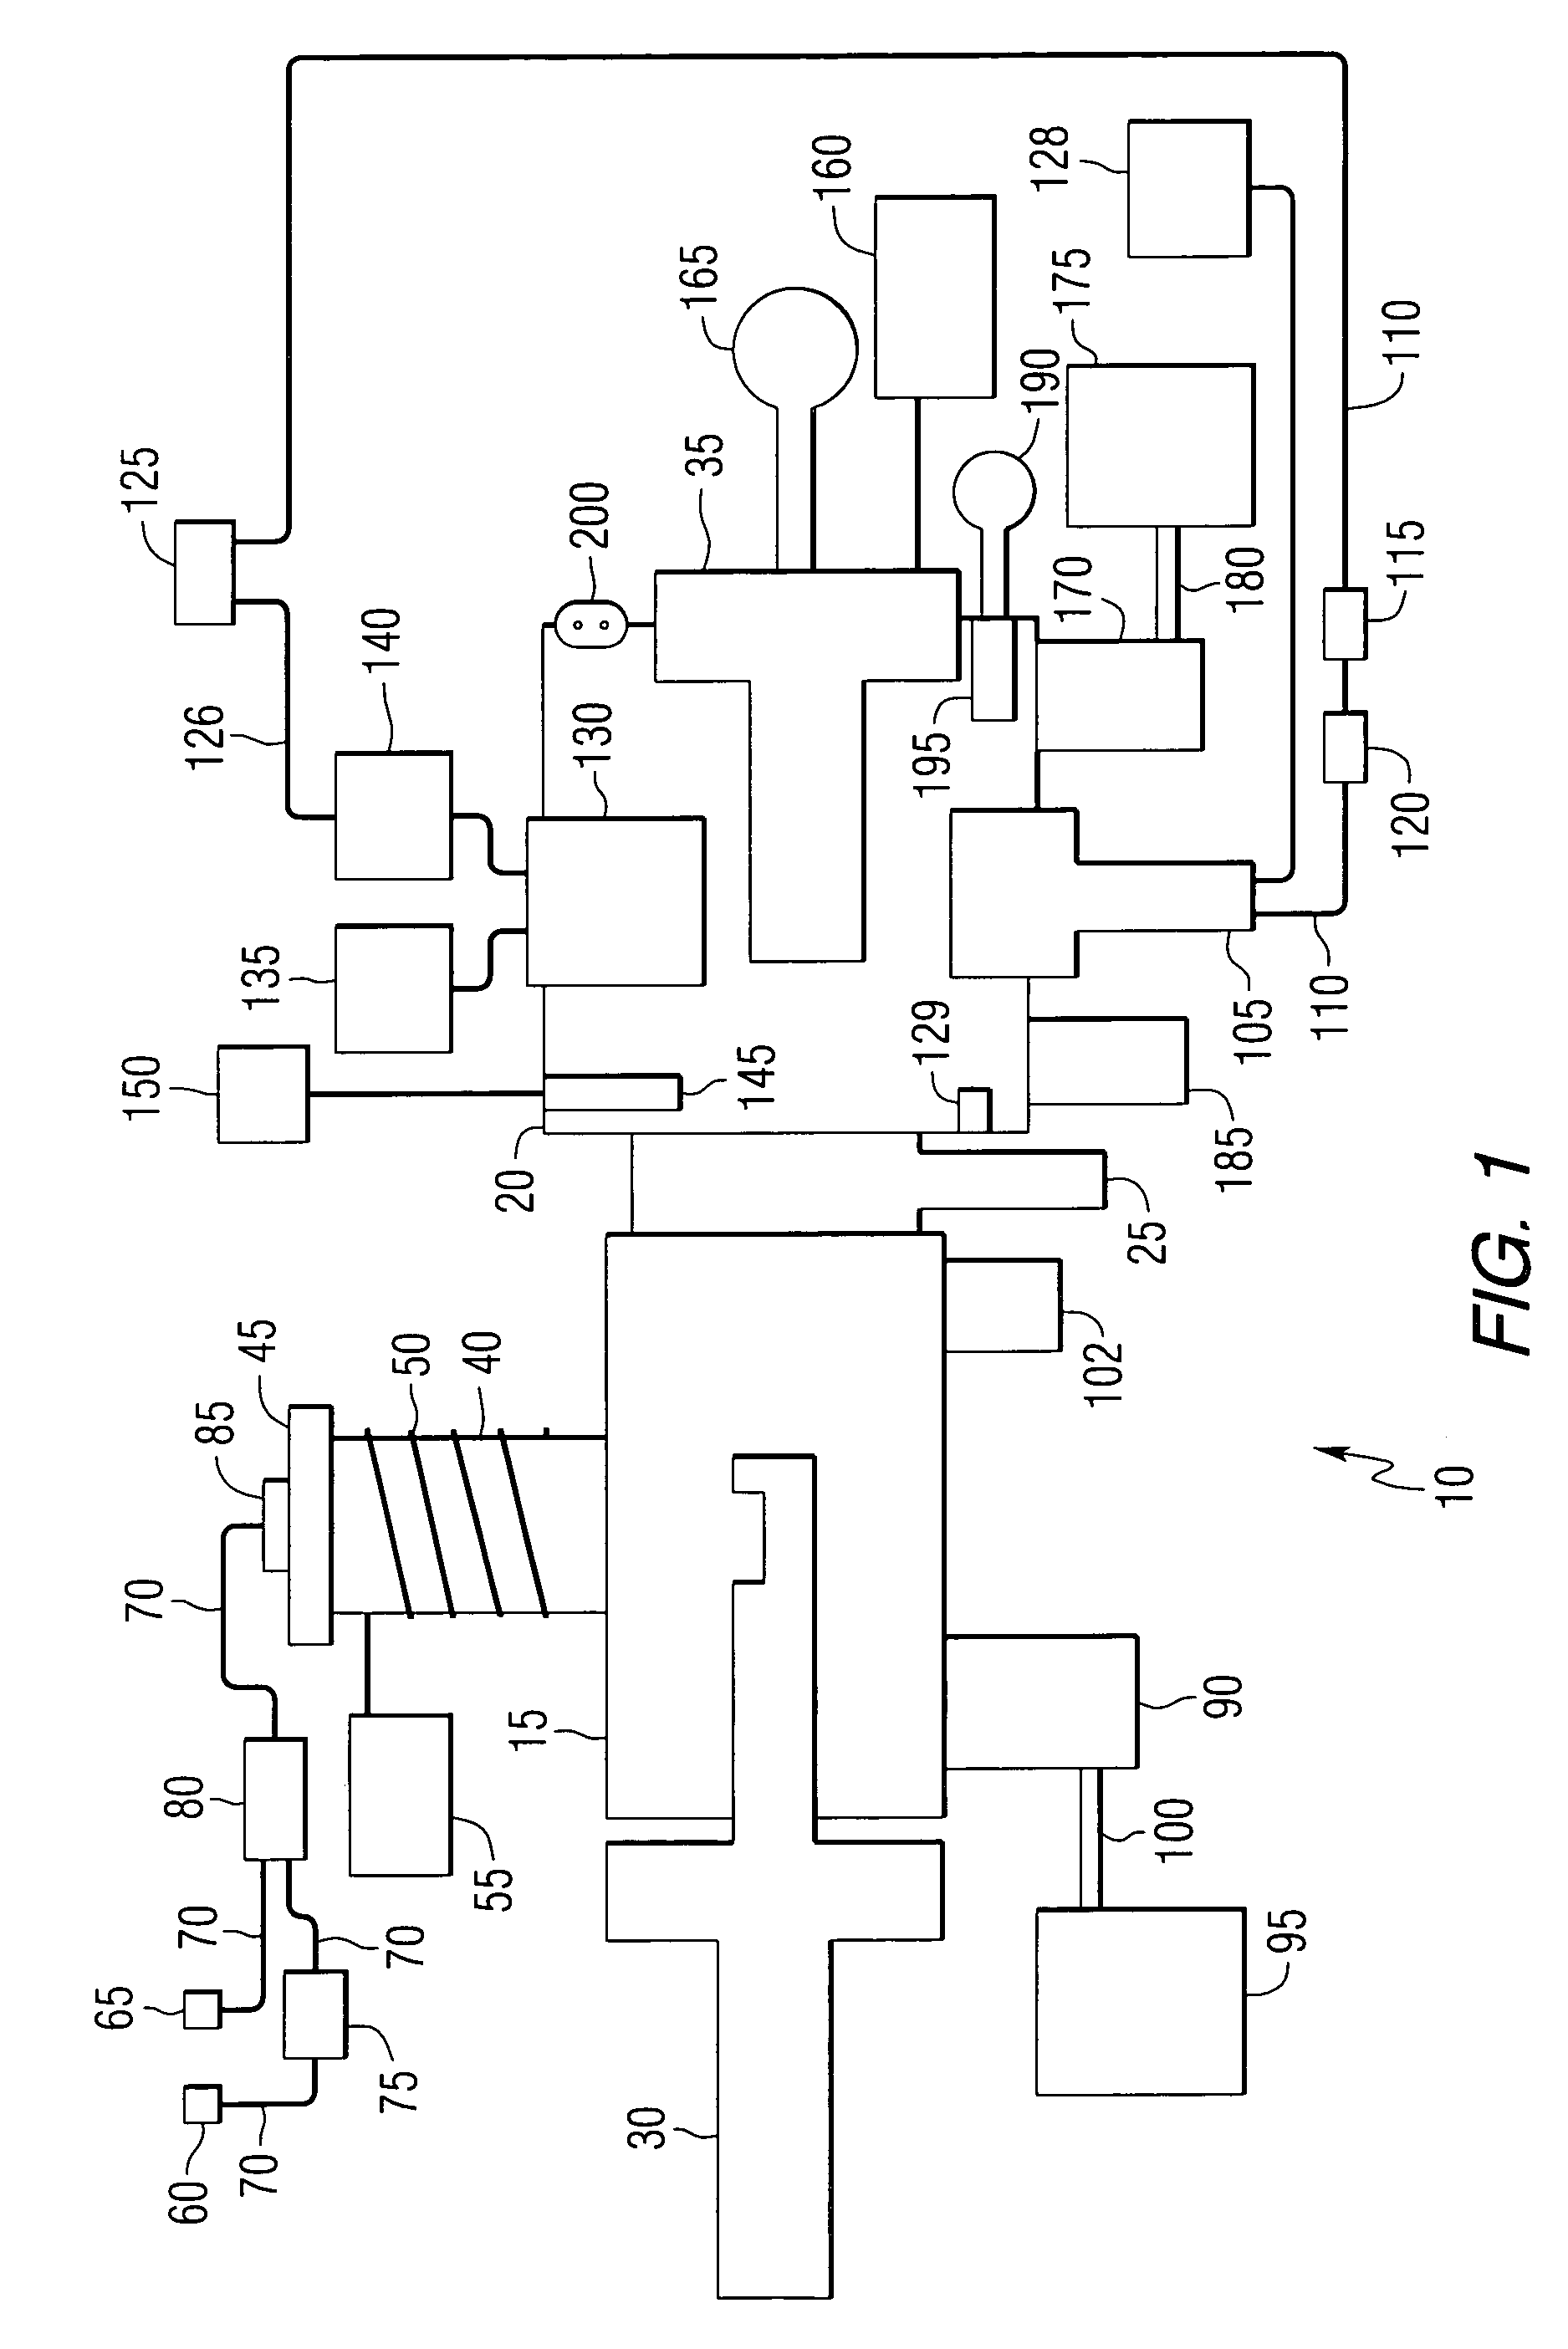 Method and apparatus for preparing specimens for microscopy